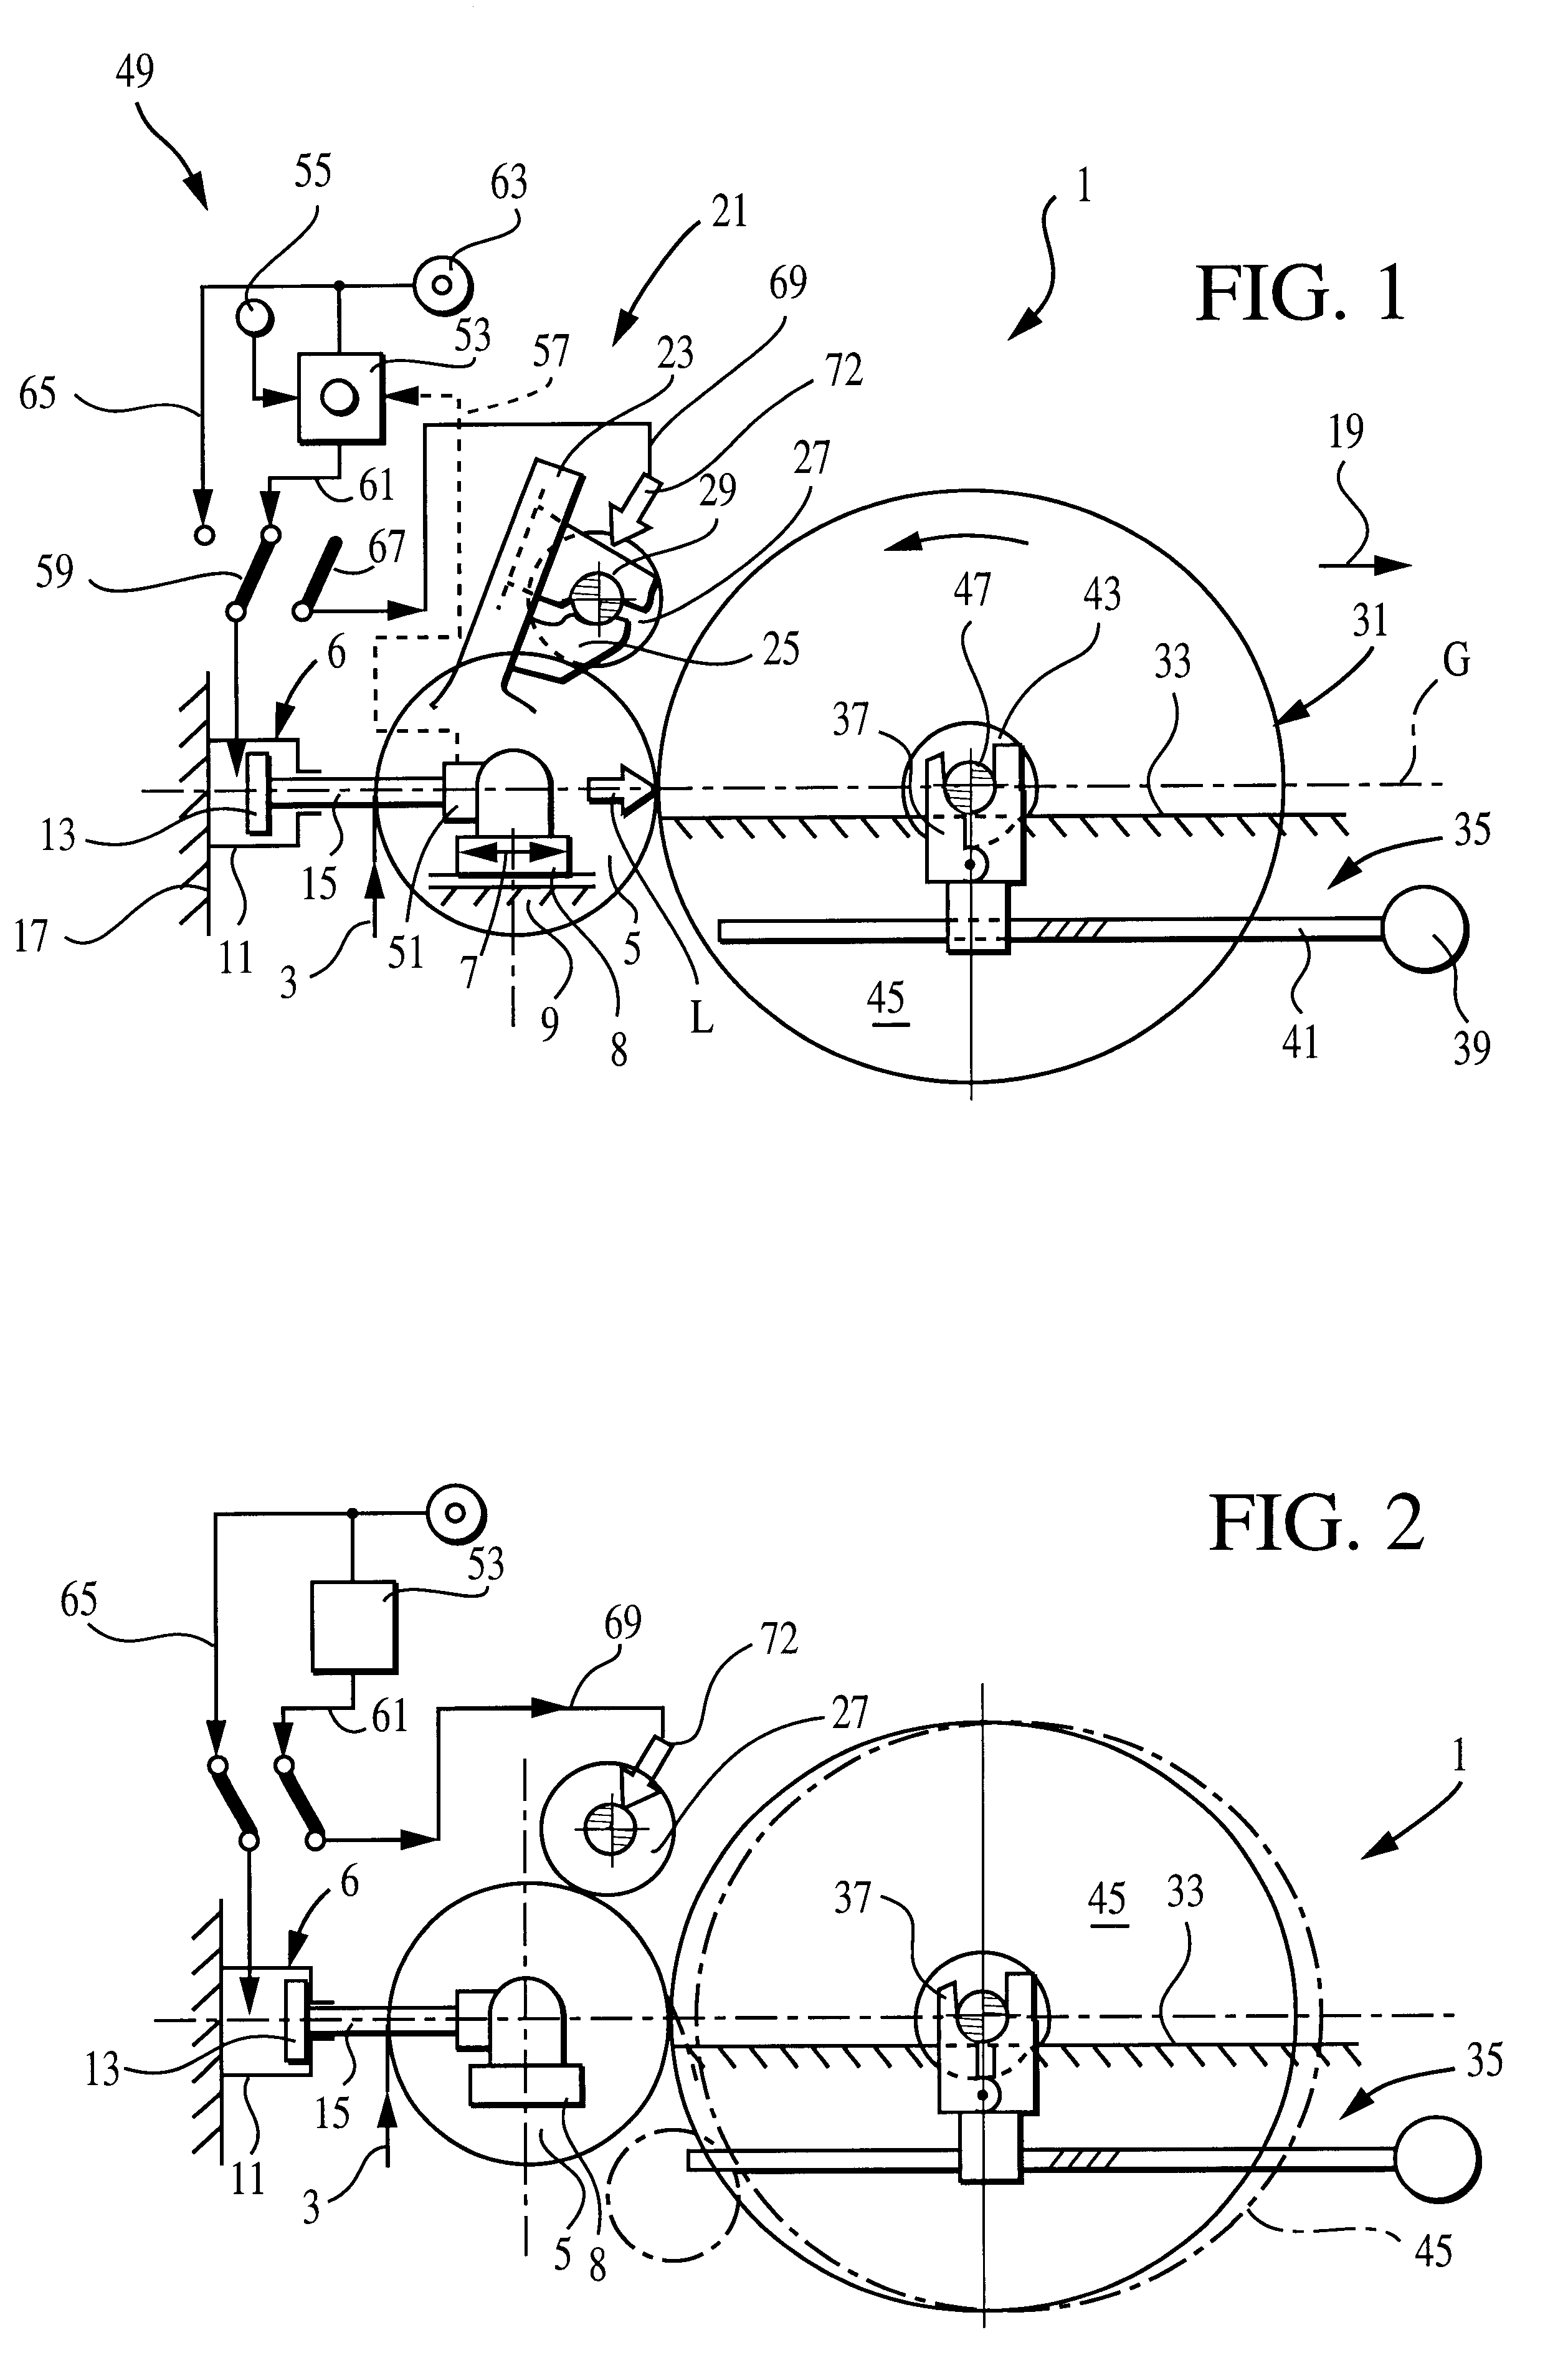 Method and apparatus for continuous winding of a web of material